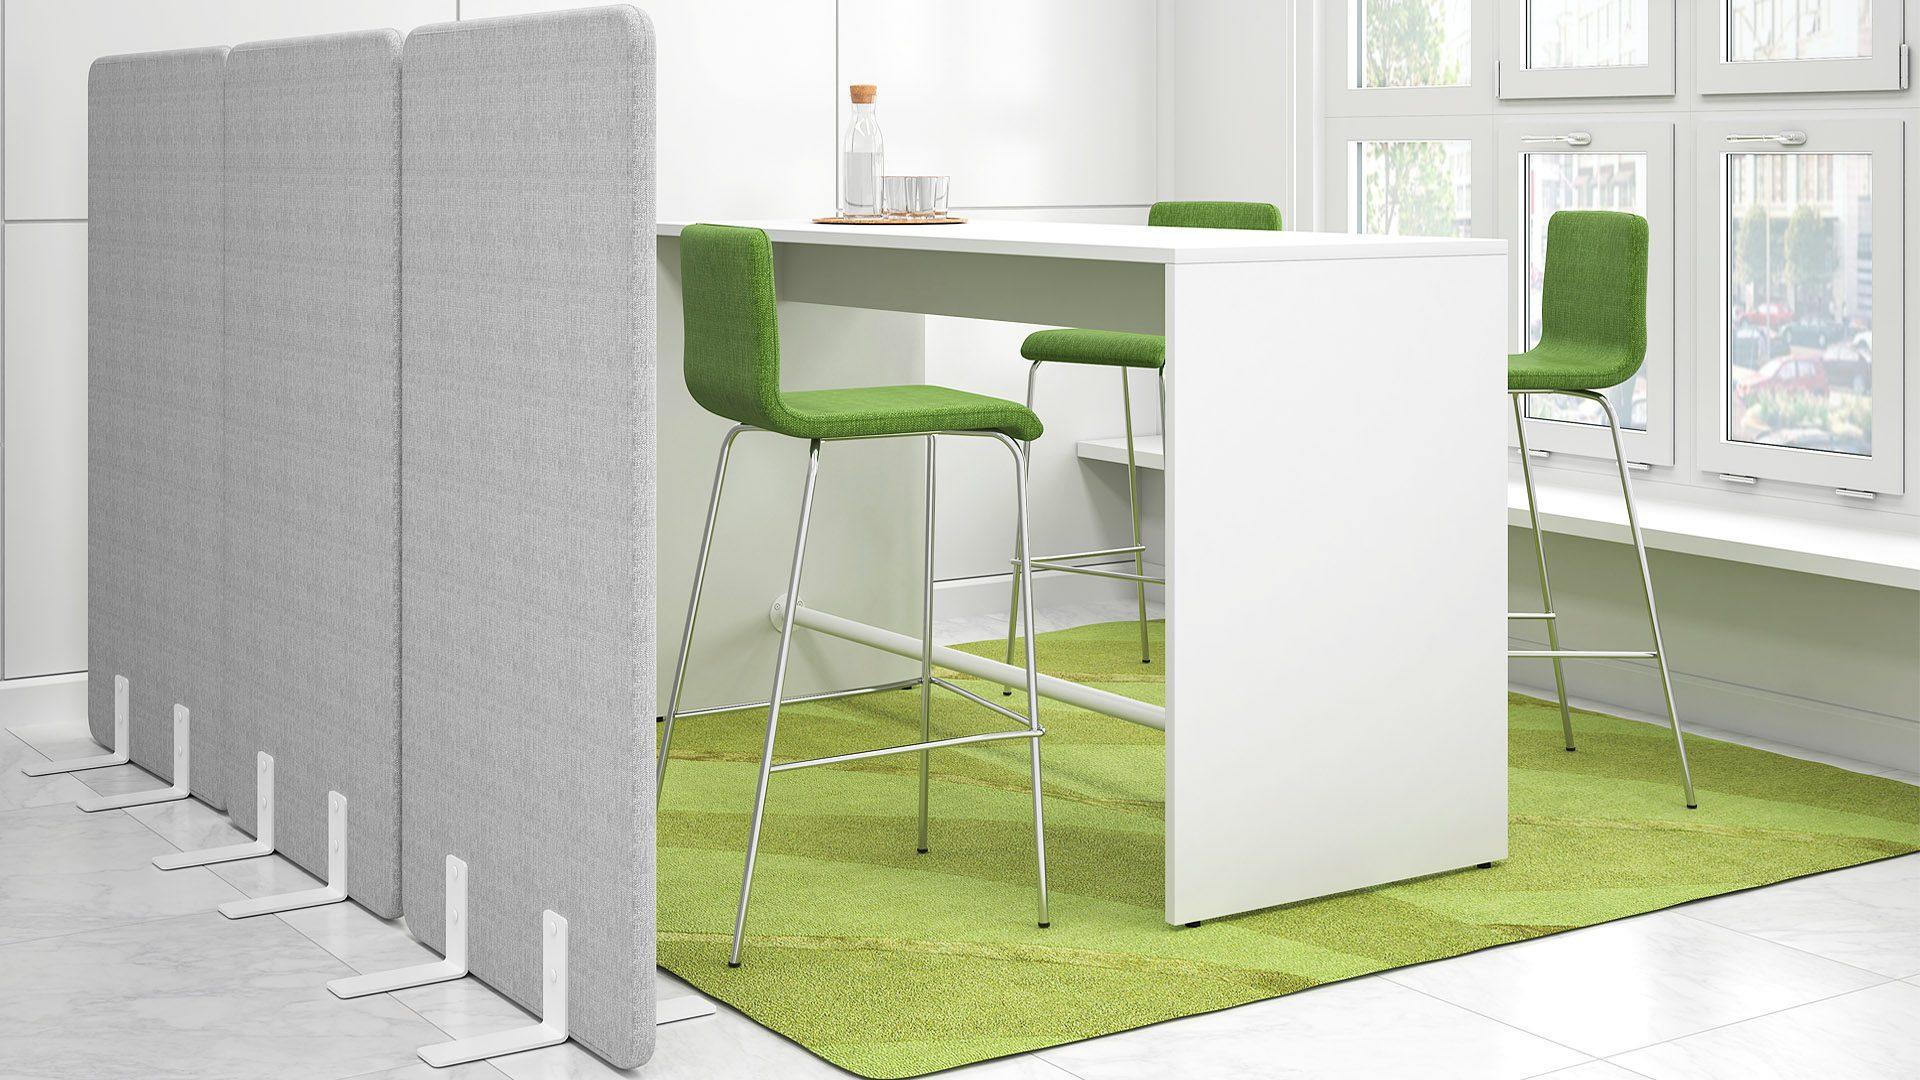 Free Standing acoustic screens offer unlimited possibilities to divide your office with visual and acoustic breaks